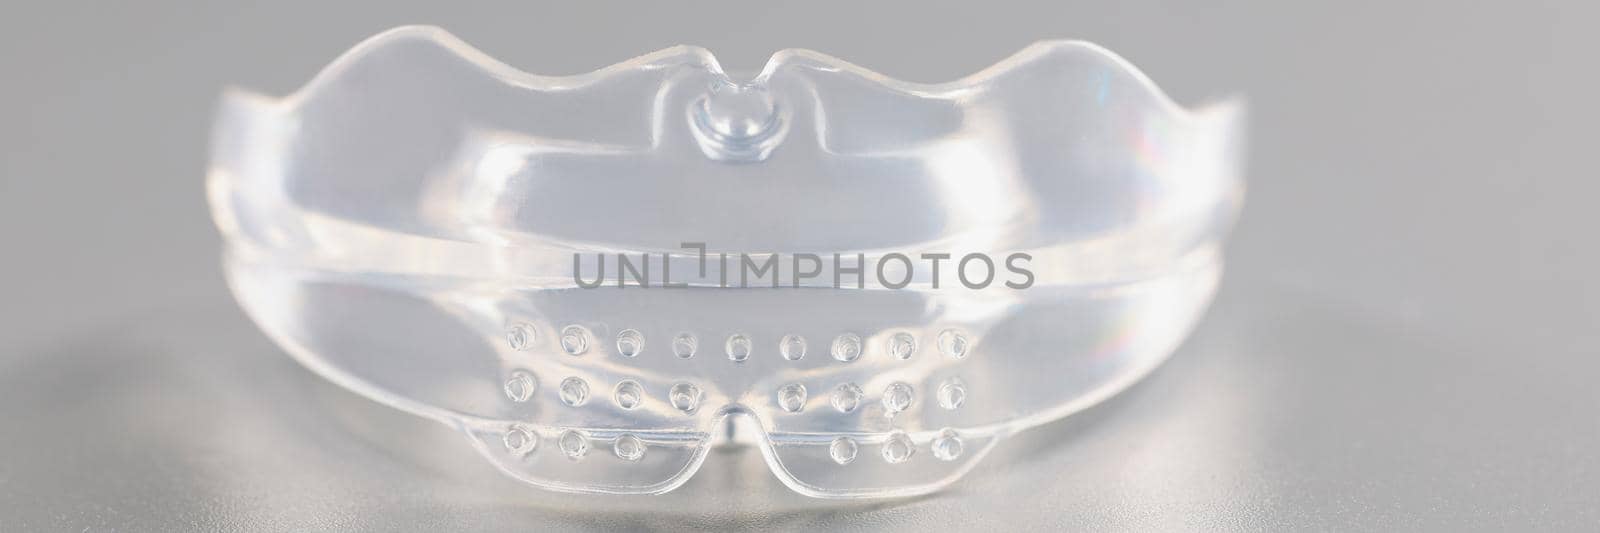 Close-up of transparent piece of mouthpiece, equipment to wear for teethcare. Instrument for correcting bite. Medicine, stomatology, dental care concept